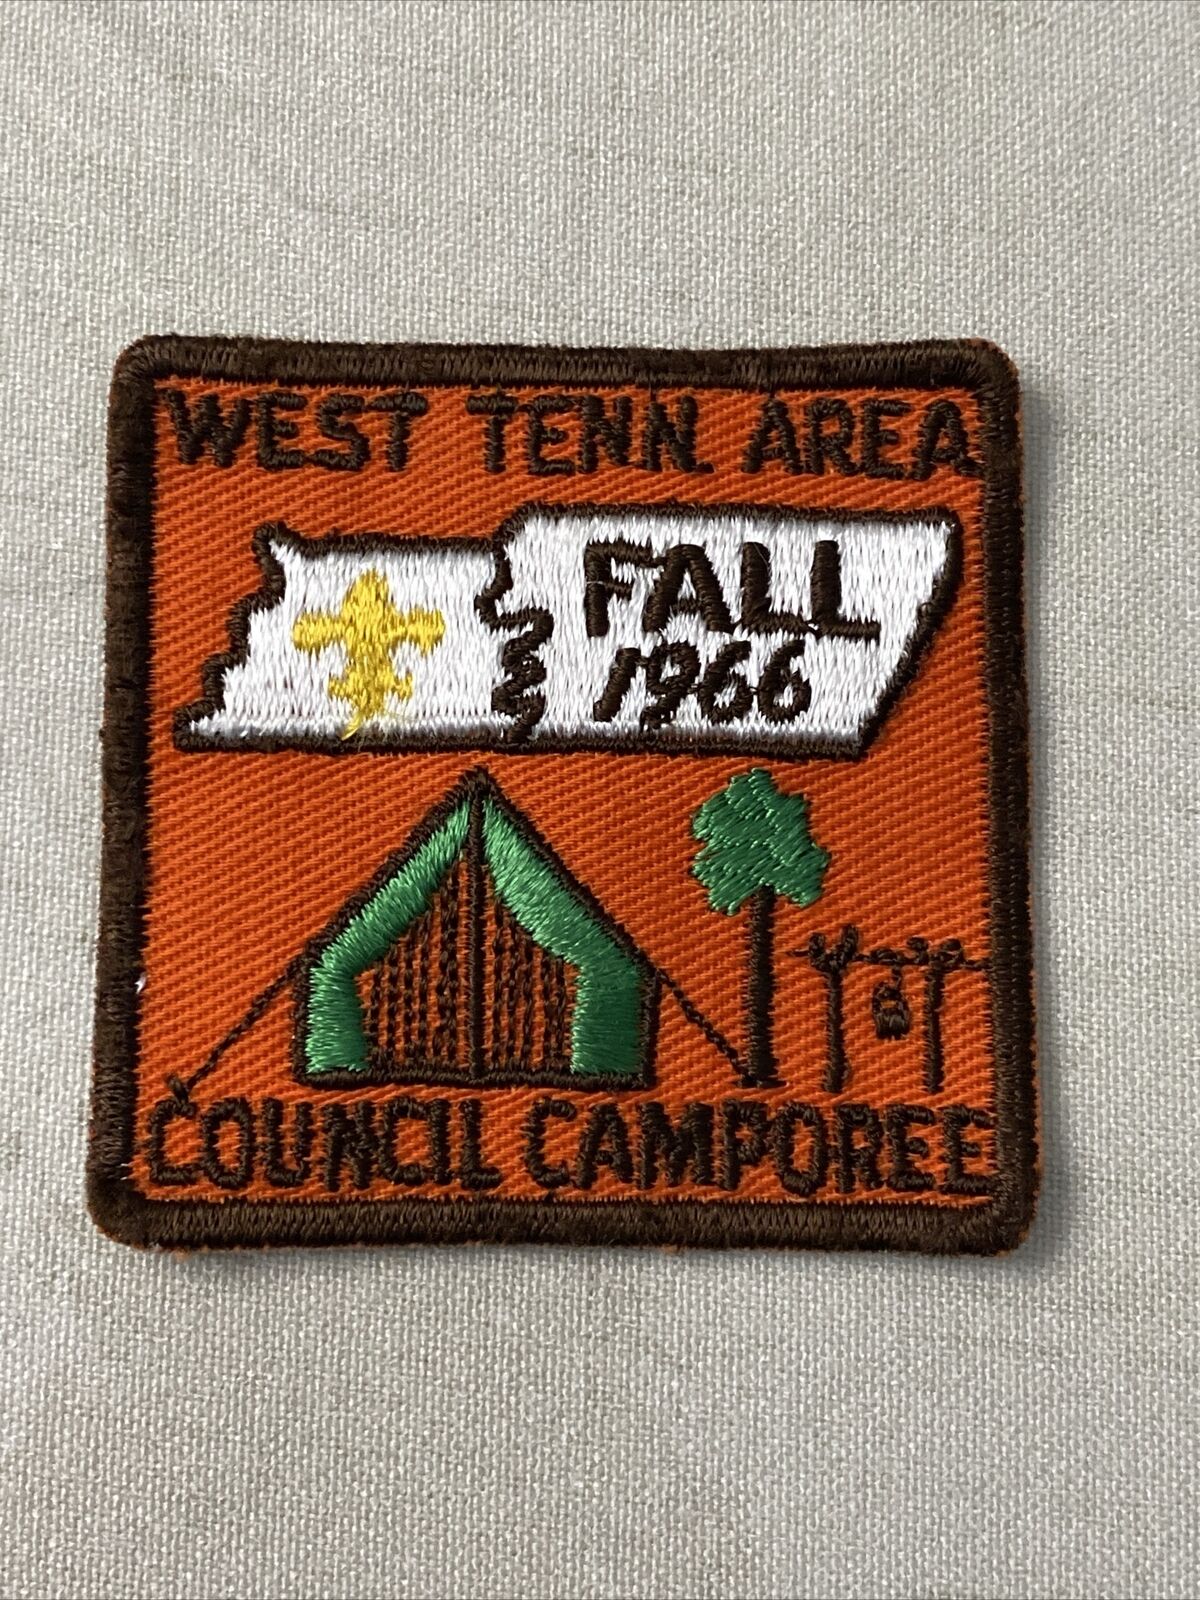 West Tennessee Area Council Fall Camporee 1966 BSA